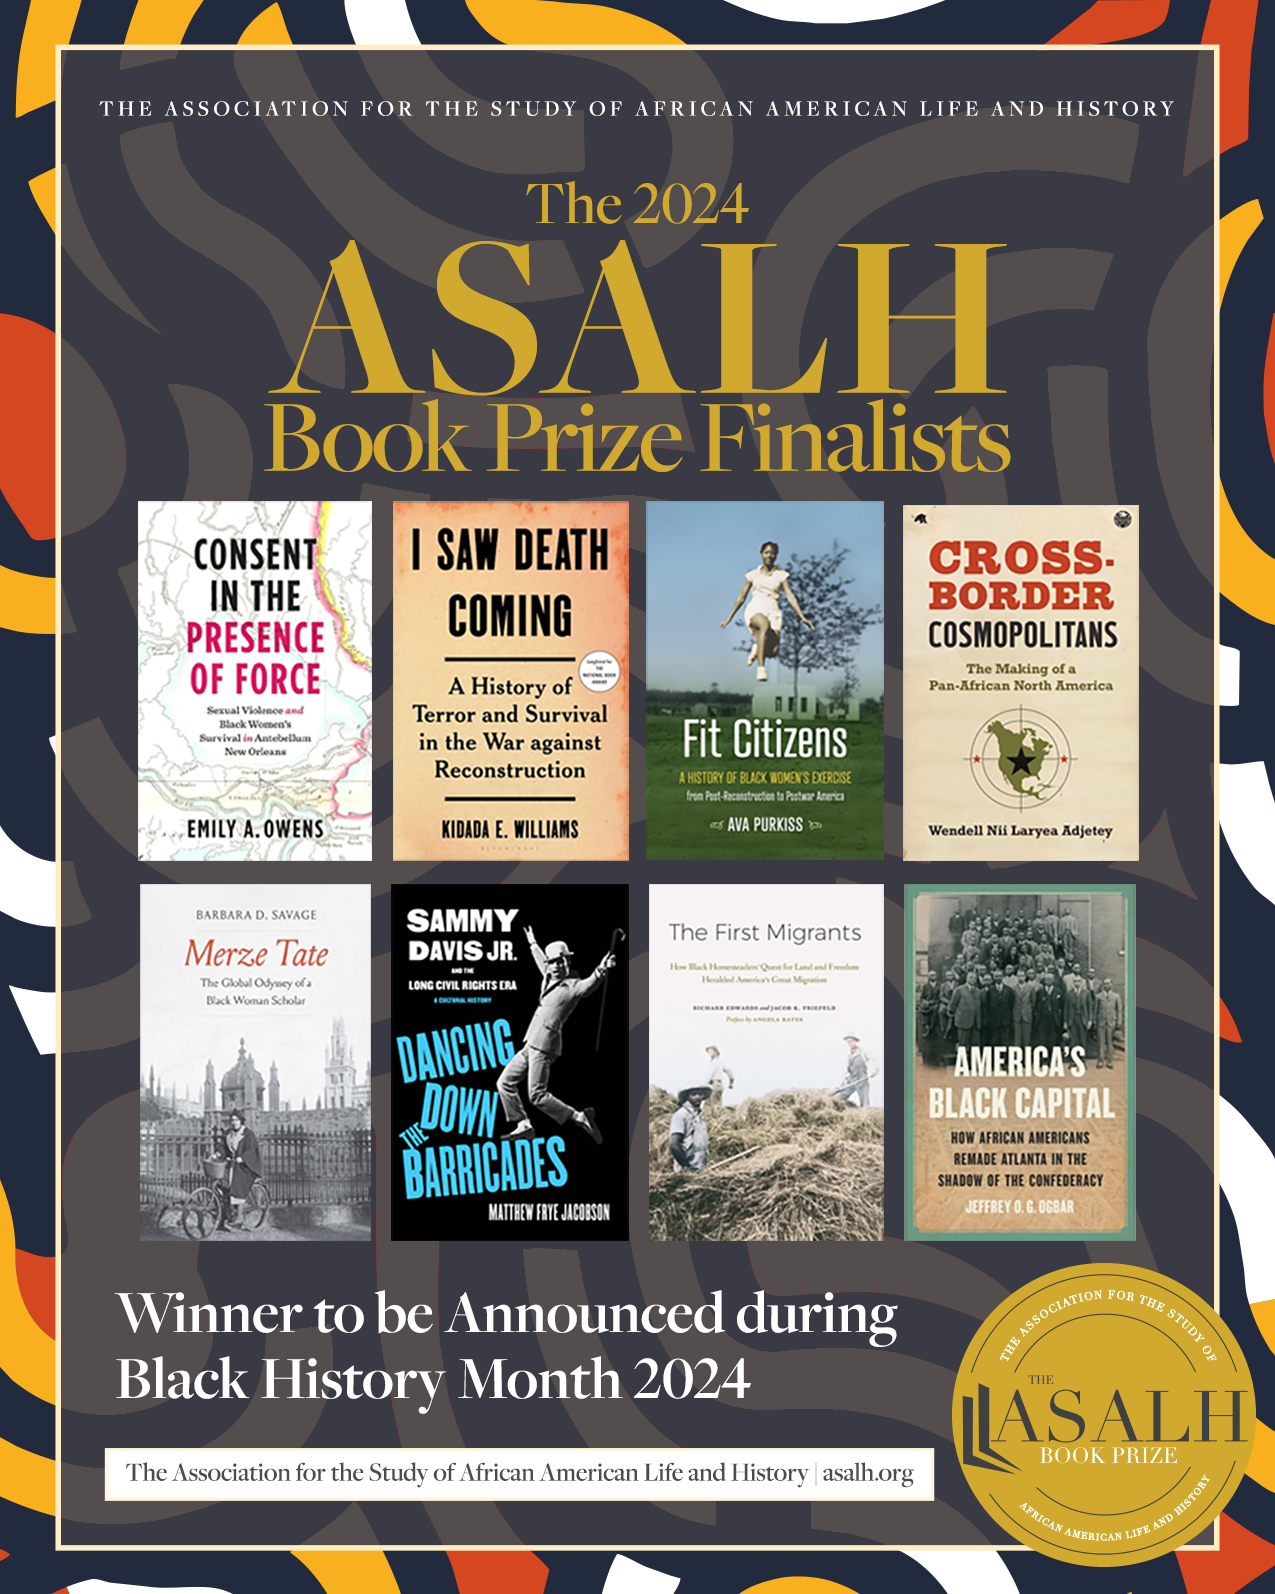 The 2024 ASALH Book Prize Finalists. Winner to be announced during Black History Month 2024